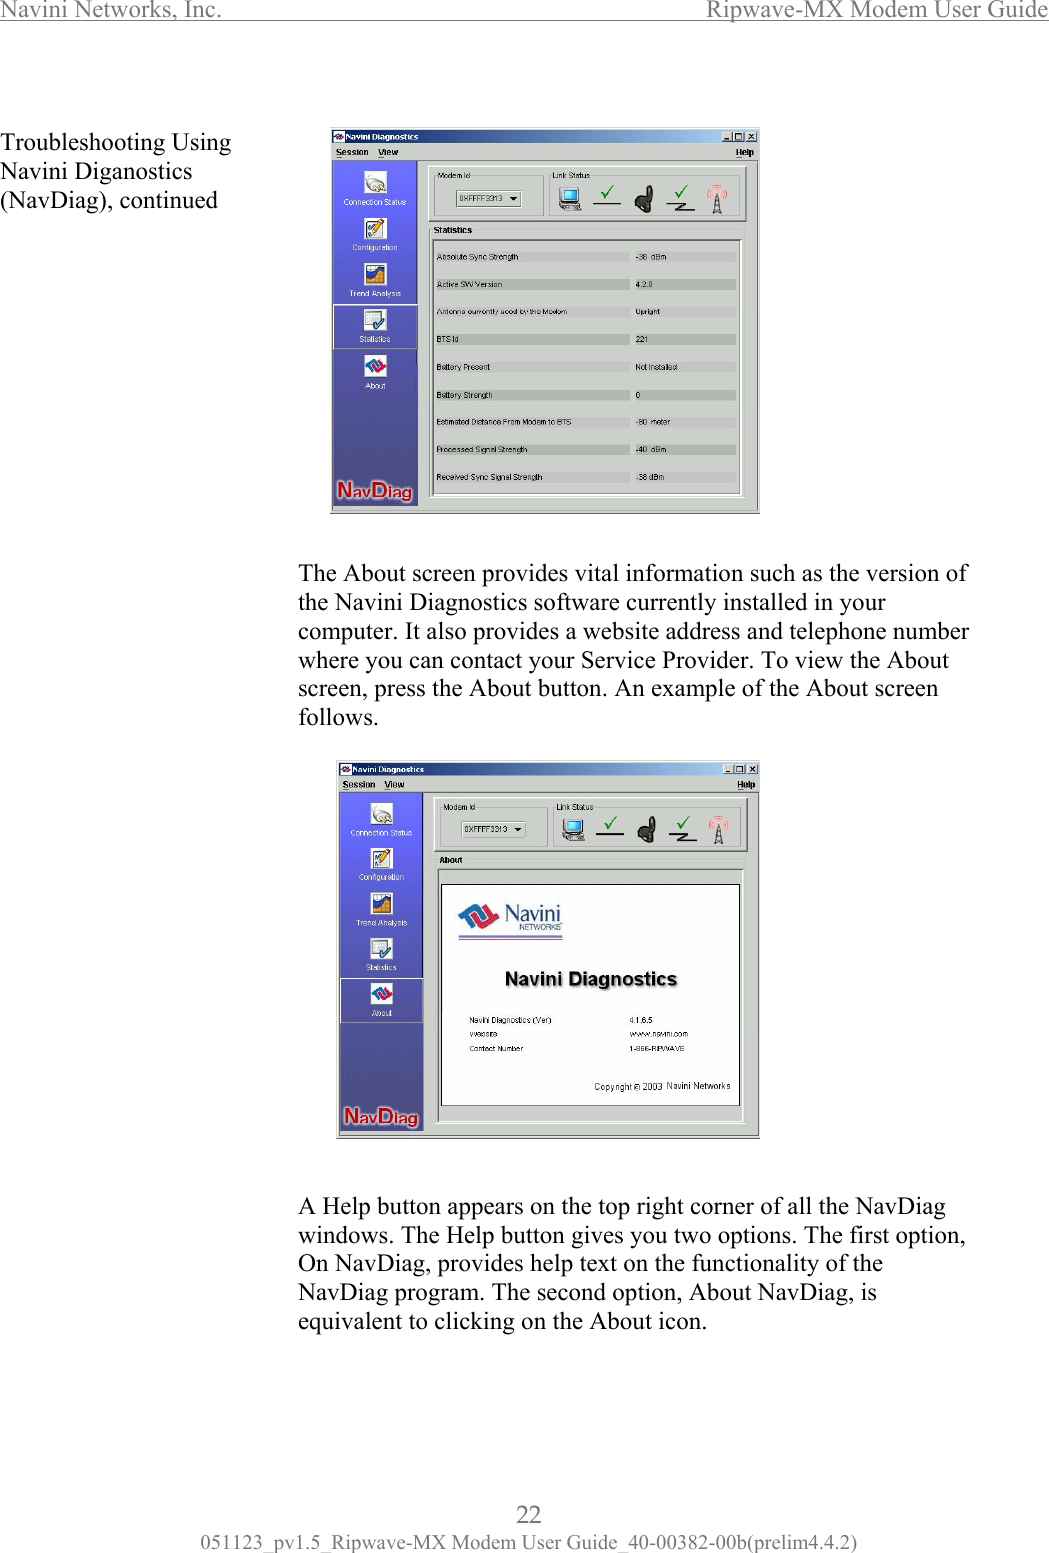 Navini Networks, Inc.                  Ripwave-MX Modem User Guide  Troubleshooting Using Navini Diganostics (NavDiag), continued                                                           The About screen provides vital information such as the version of e Navini Diagnostics software currently installed in your omputer. It also provides a website address and telephone number out n, vides help text on the functionality of the avDiag program. The second option, About NavDiag, is quivalent to clicking on the About icon.  thcwhere you can contact your Service Provider. To view the Abscreen, press the About button. An example of the About screen follows.                 A Help button appears on the top right corner of all the NavDiag windows. The Help button gives you two options. The first optioOn NavDiag, proNe 22 051123_pv1.5_Ripwave-MX Modem User Guide_40-00382-00b(prelim4.4.2) 